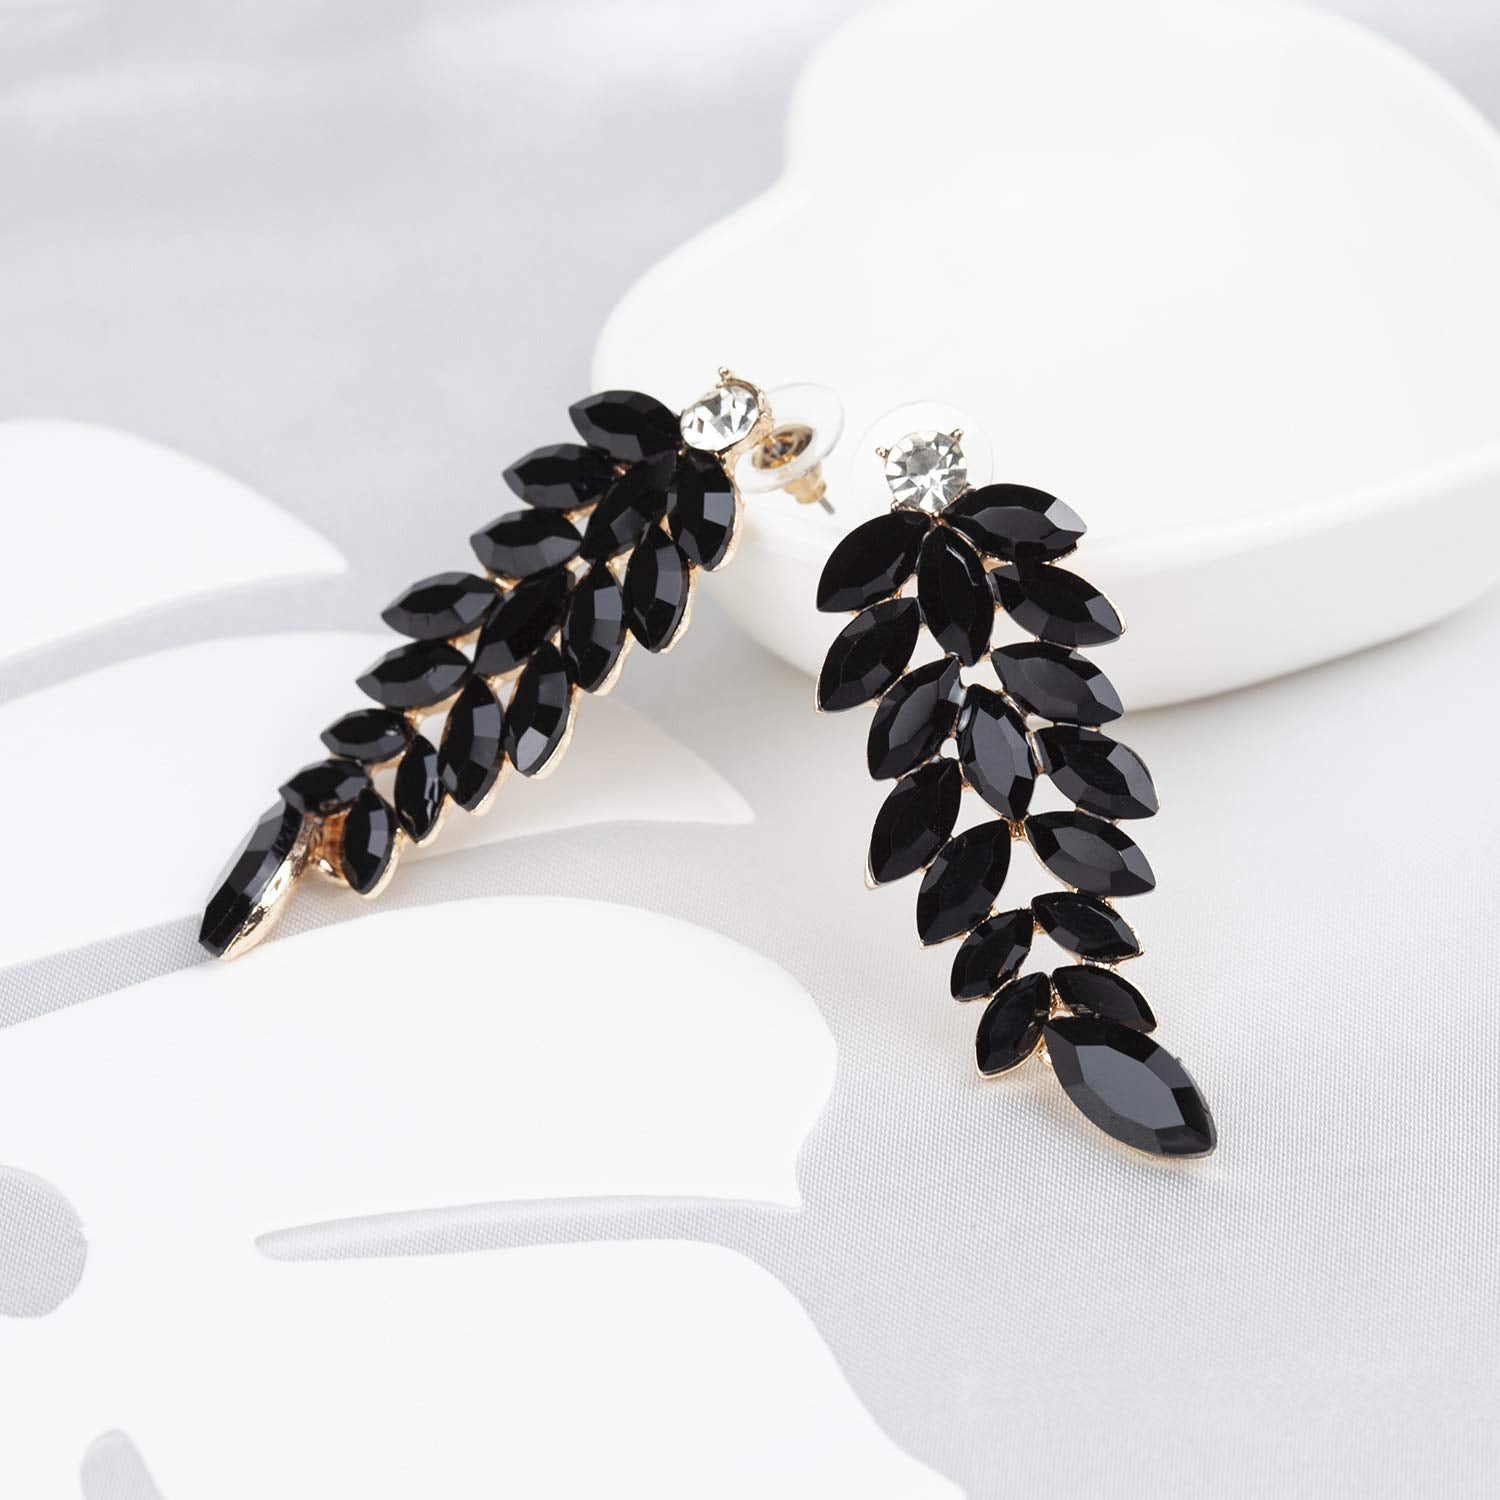 Yellow Chimes Elegant Gold Plated Leaf Crystal Dangle Earrings for Women and Girls (Black)